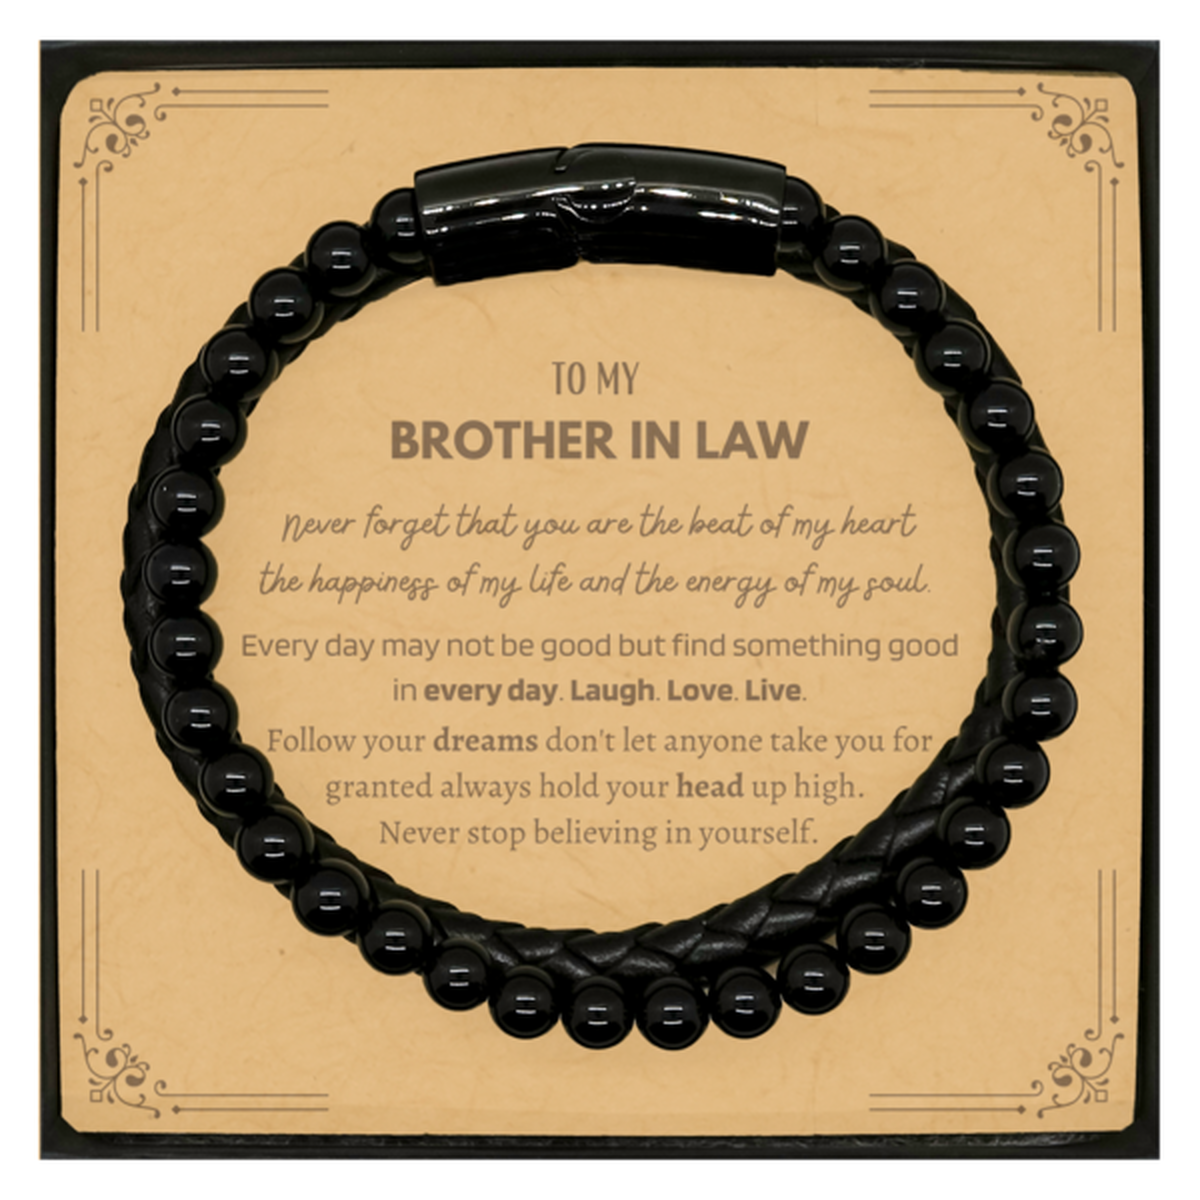 To My Brother In Law Message Card Gifts, Christmas Brother In Law Stone Leather Bracelets Present, Birthday Unique Motivational For Brother In Law, To My Brother In Law Never forget that you are the beat of my heart the happiness of my life and the energy